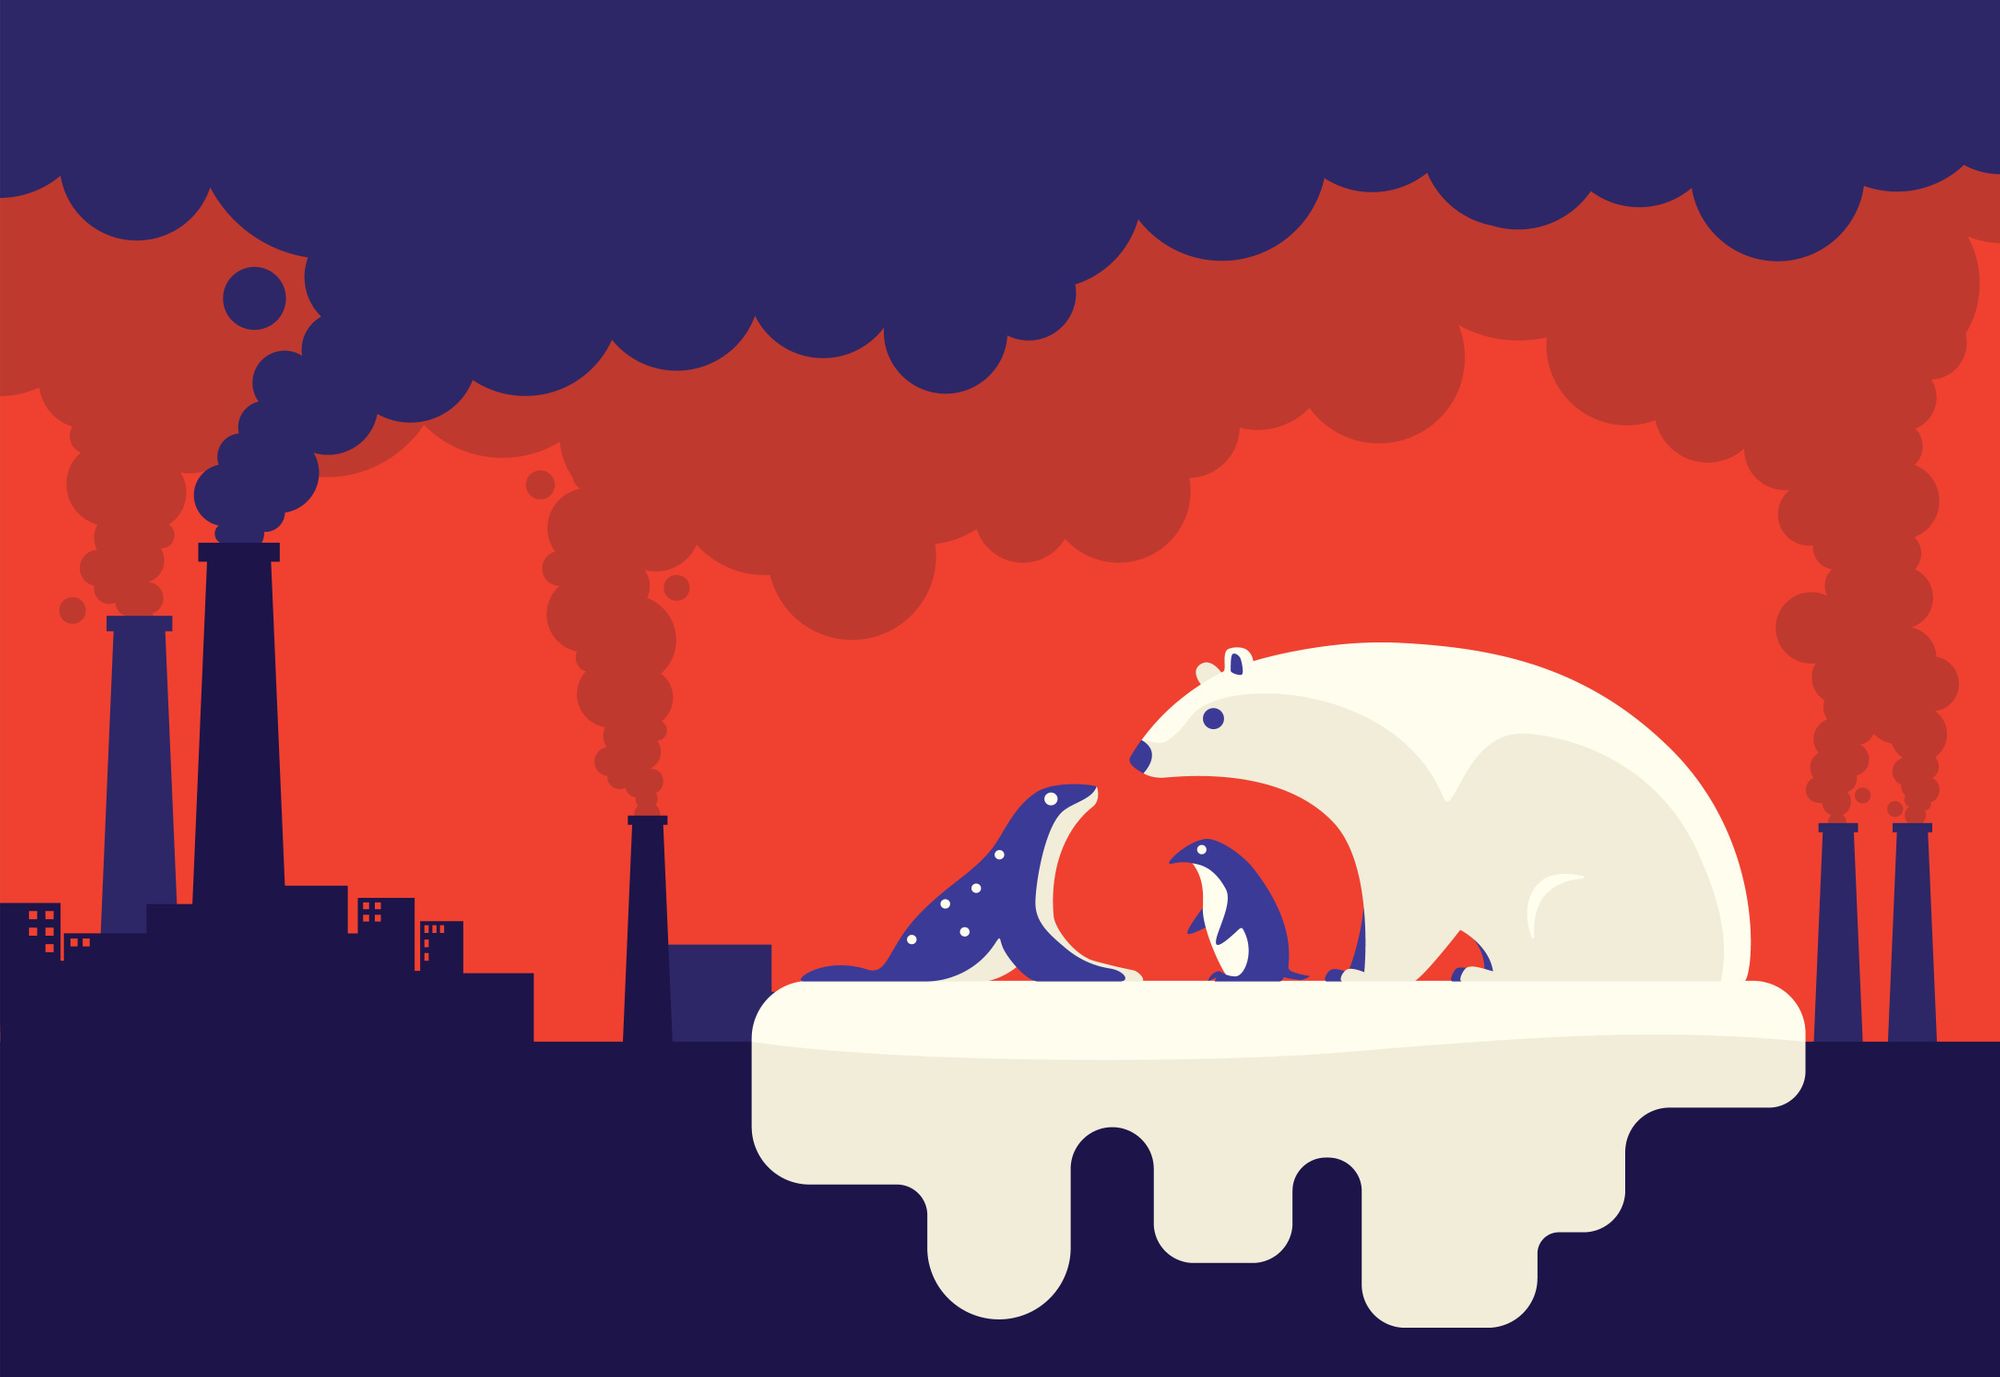 An illustration which demonstrates the role of business in climate change, with a melting iceberg next to a factory.